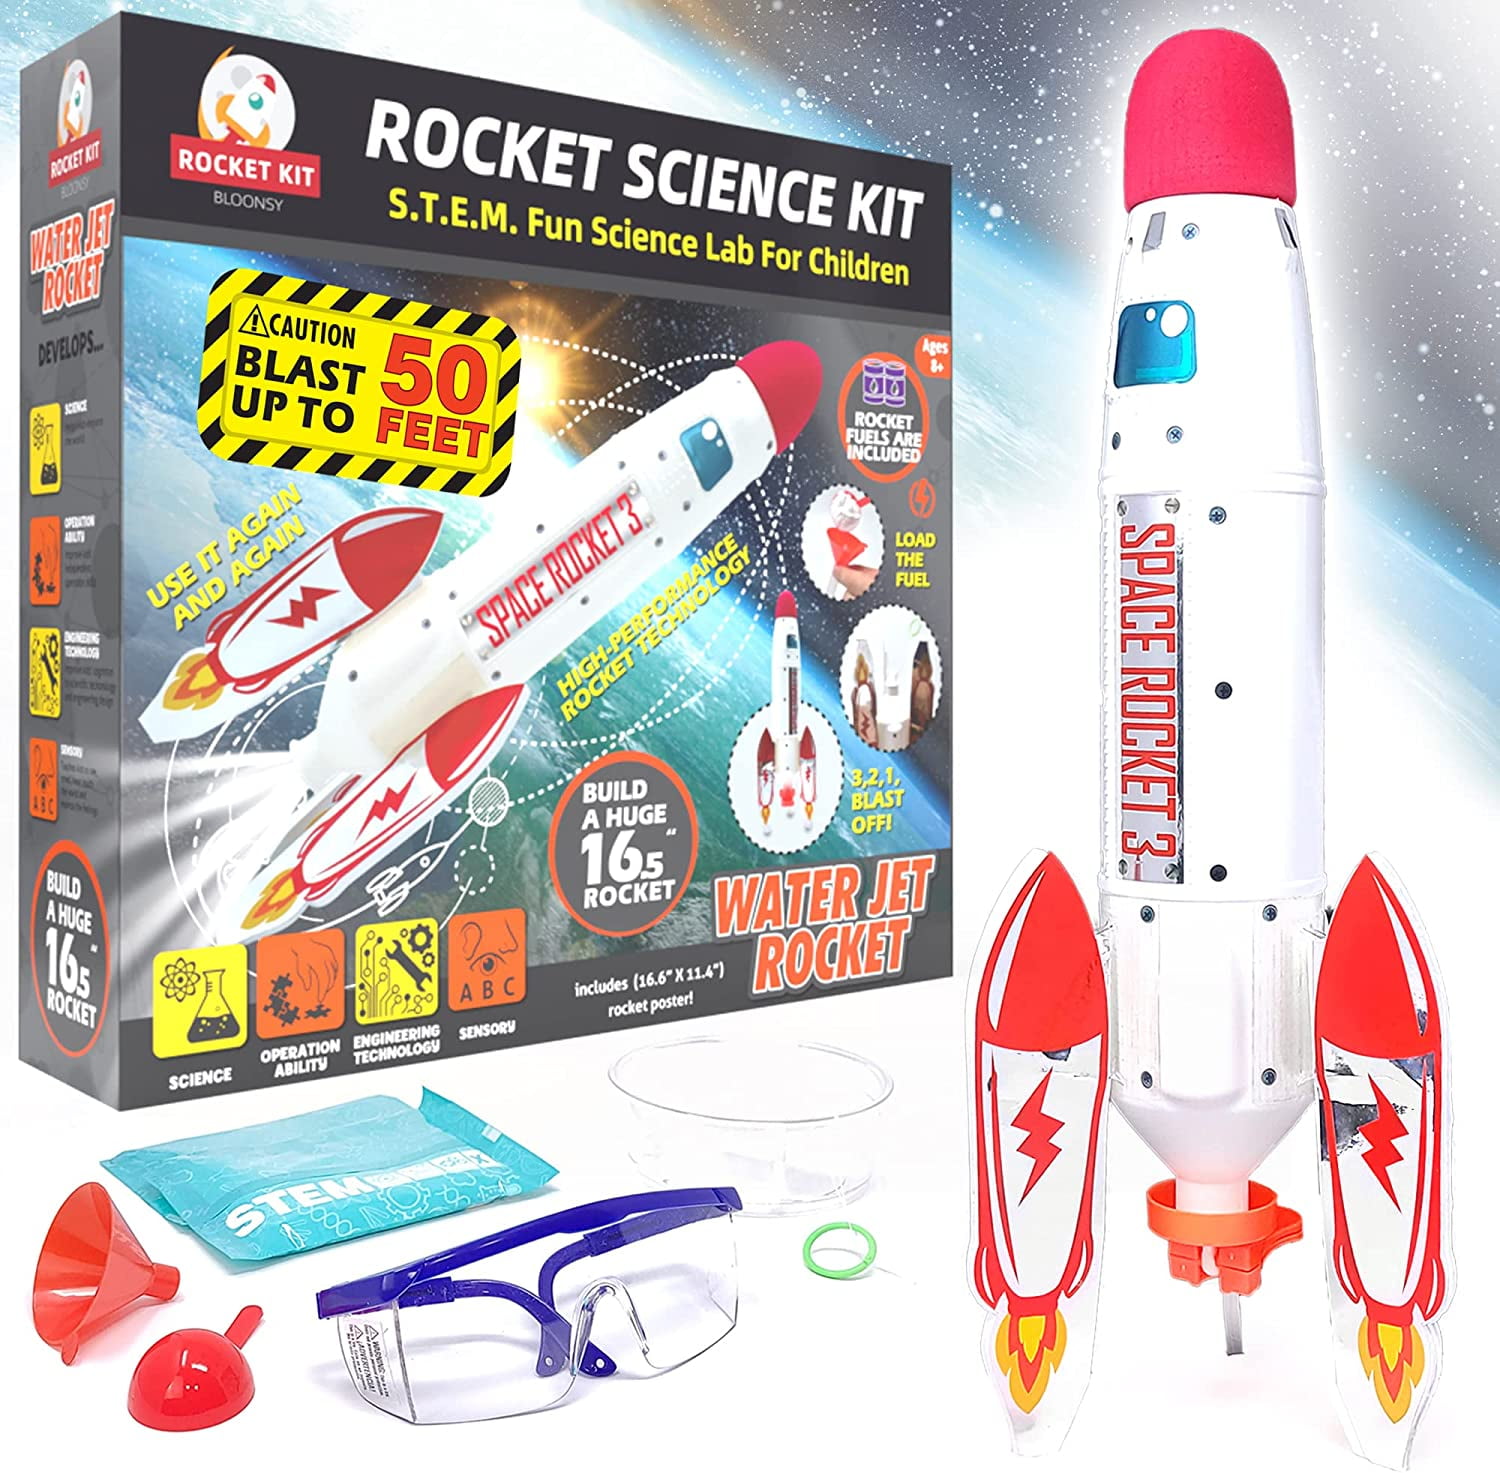 6 Things to Know About Launching Water-Bottle Rockets – Scout Life